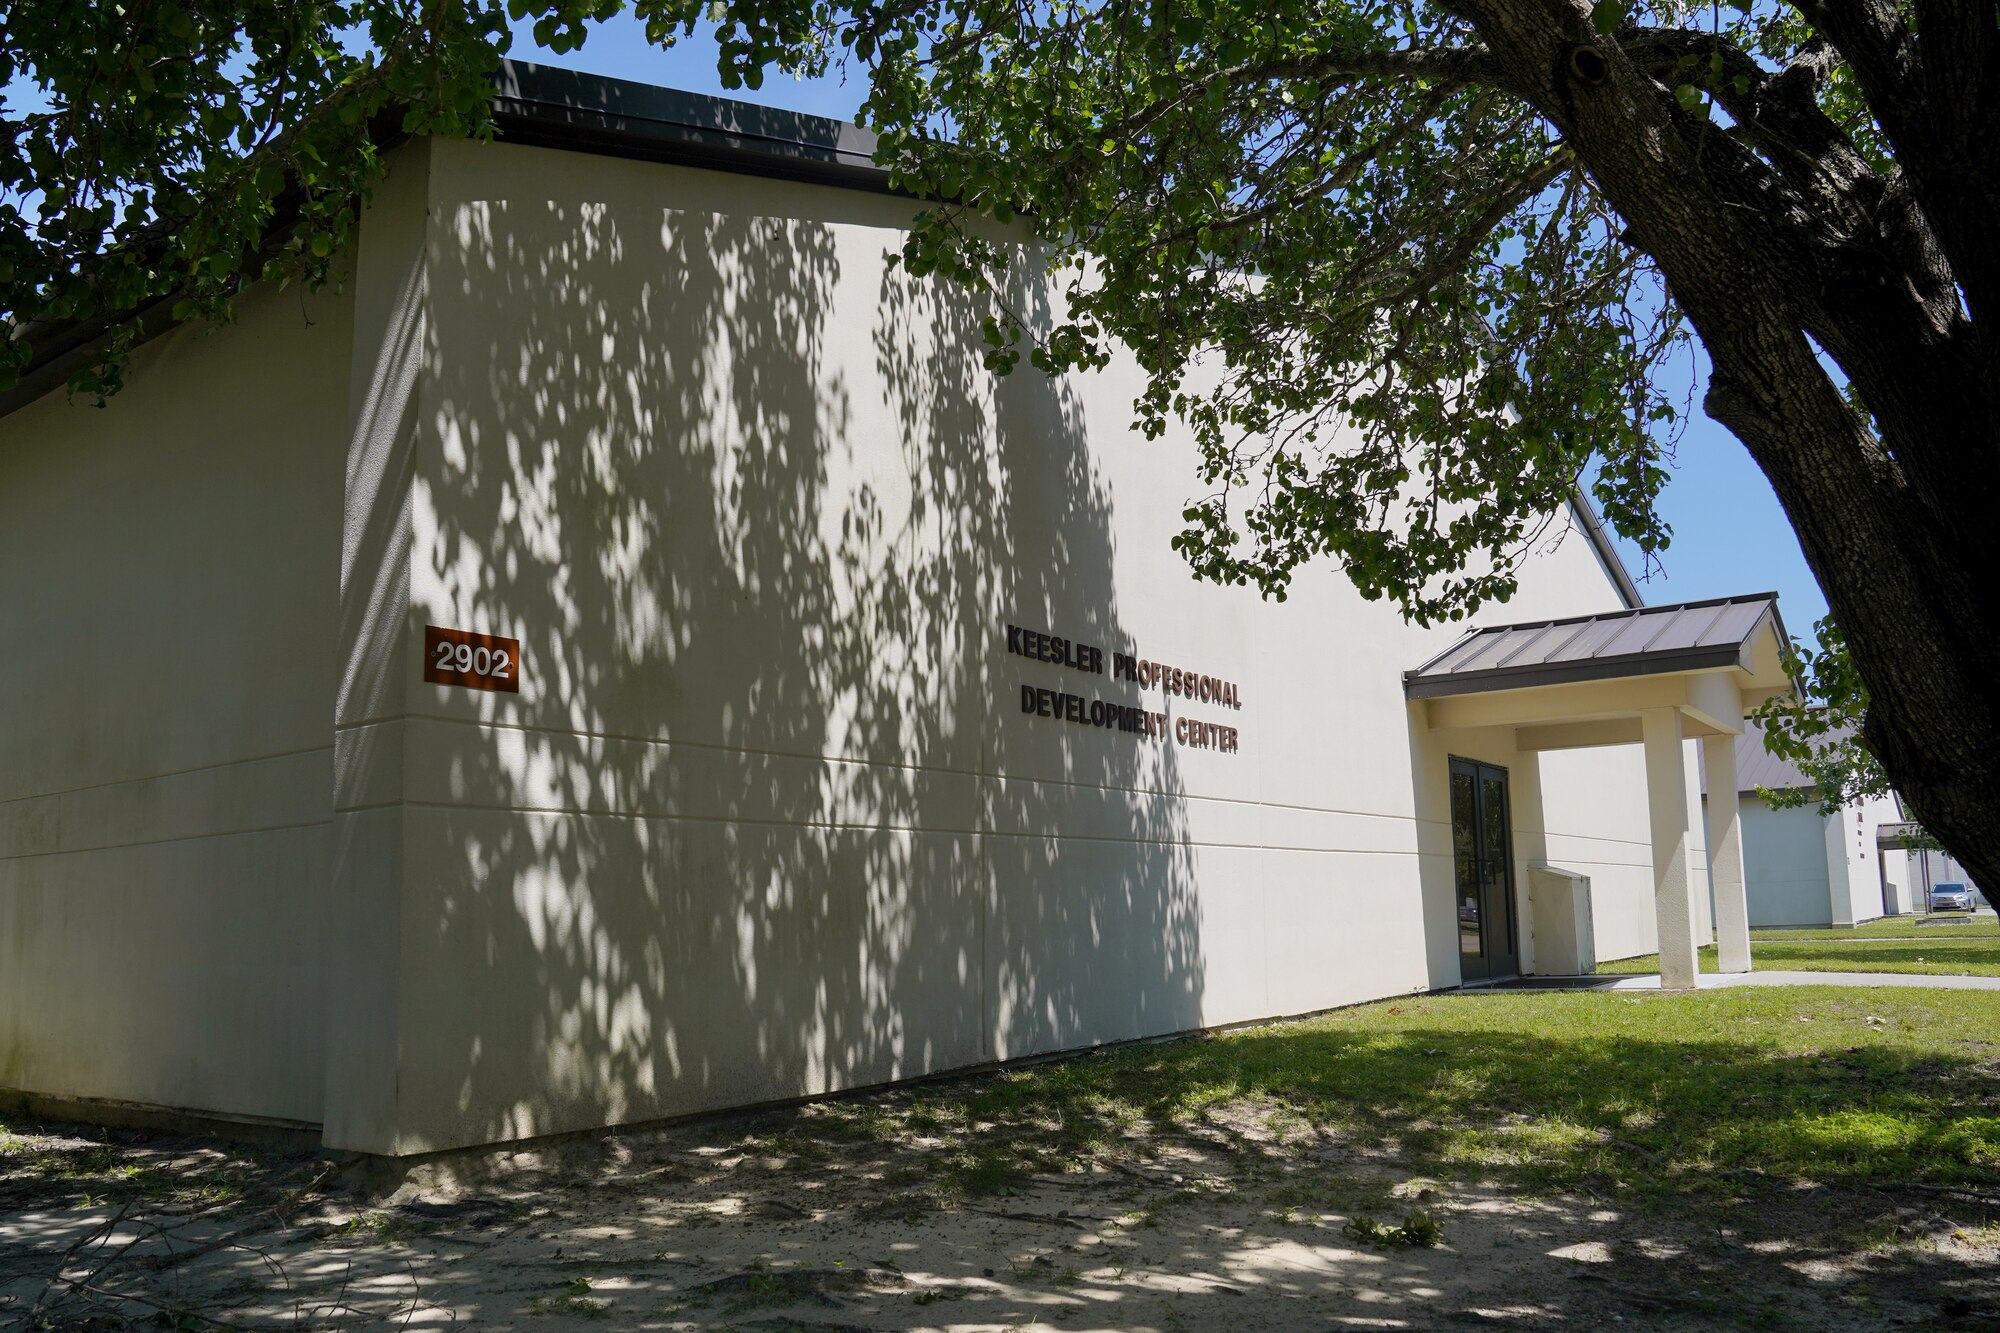 The Professional Development Center is located on Gen. Chappie James Avenue and E Street, Building 2902. The PDC provides personal and professional development opportunities for service members. (U.S. Air Force photo by Senior Airman Seth Haddix)